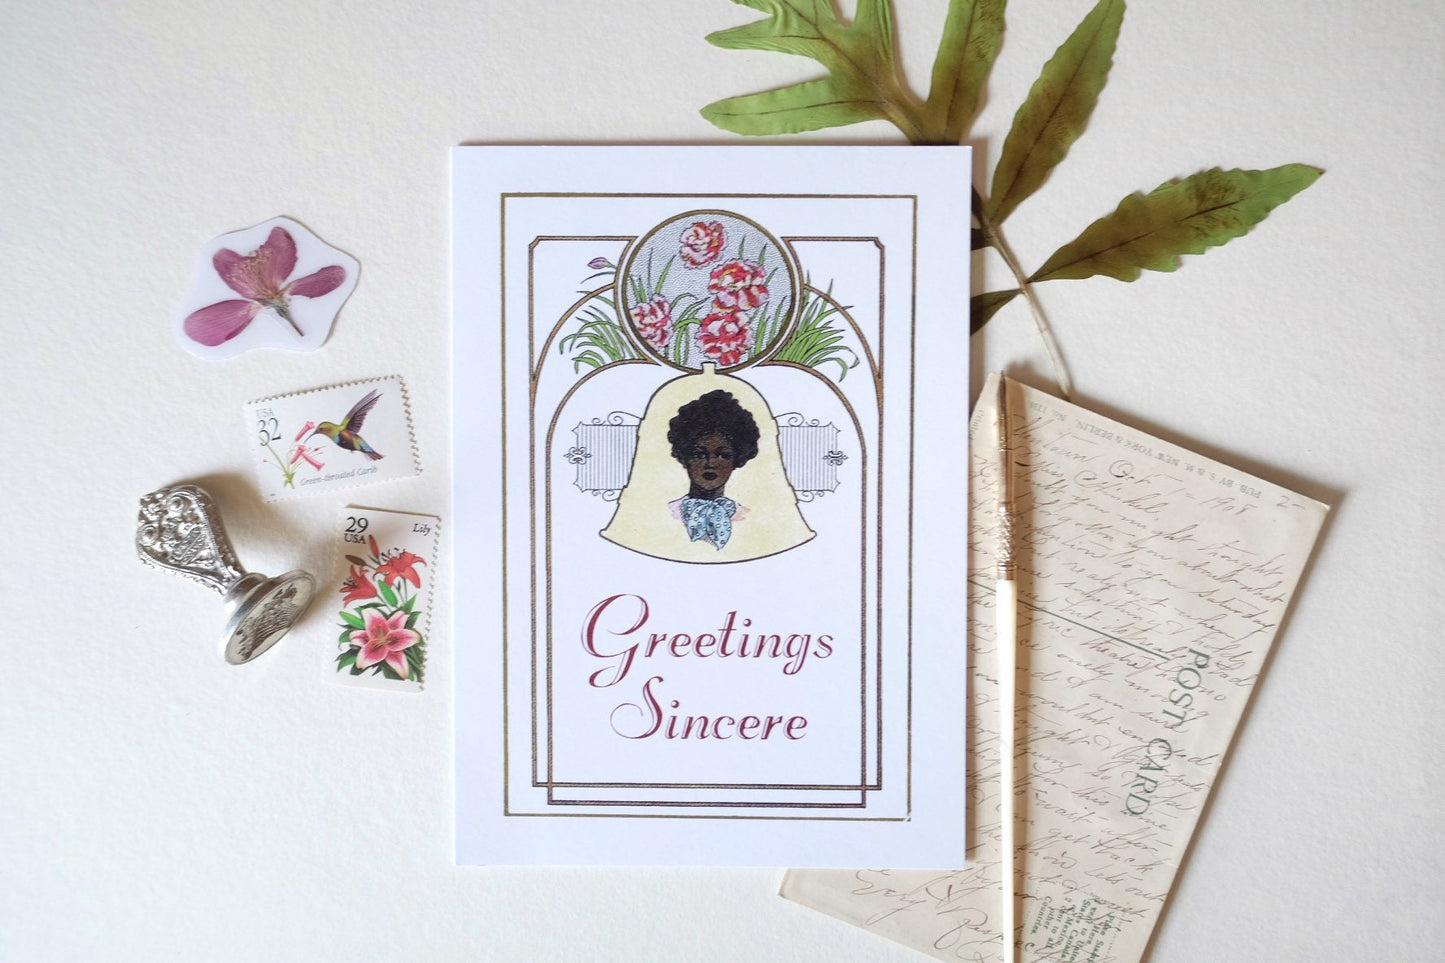 Greetings Sincere - Victorian Greeting Card